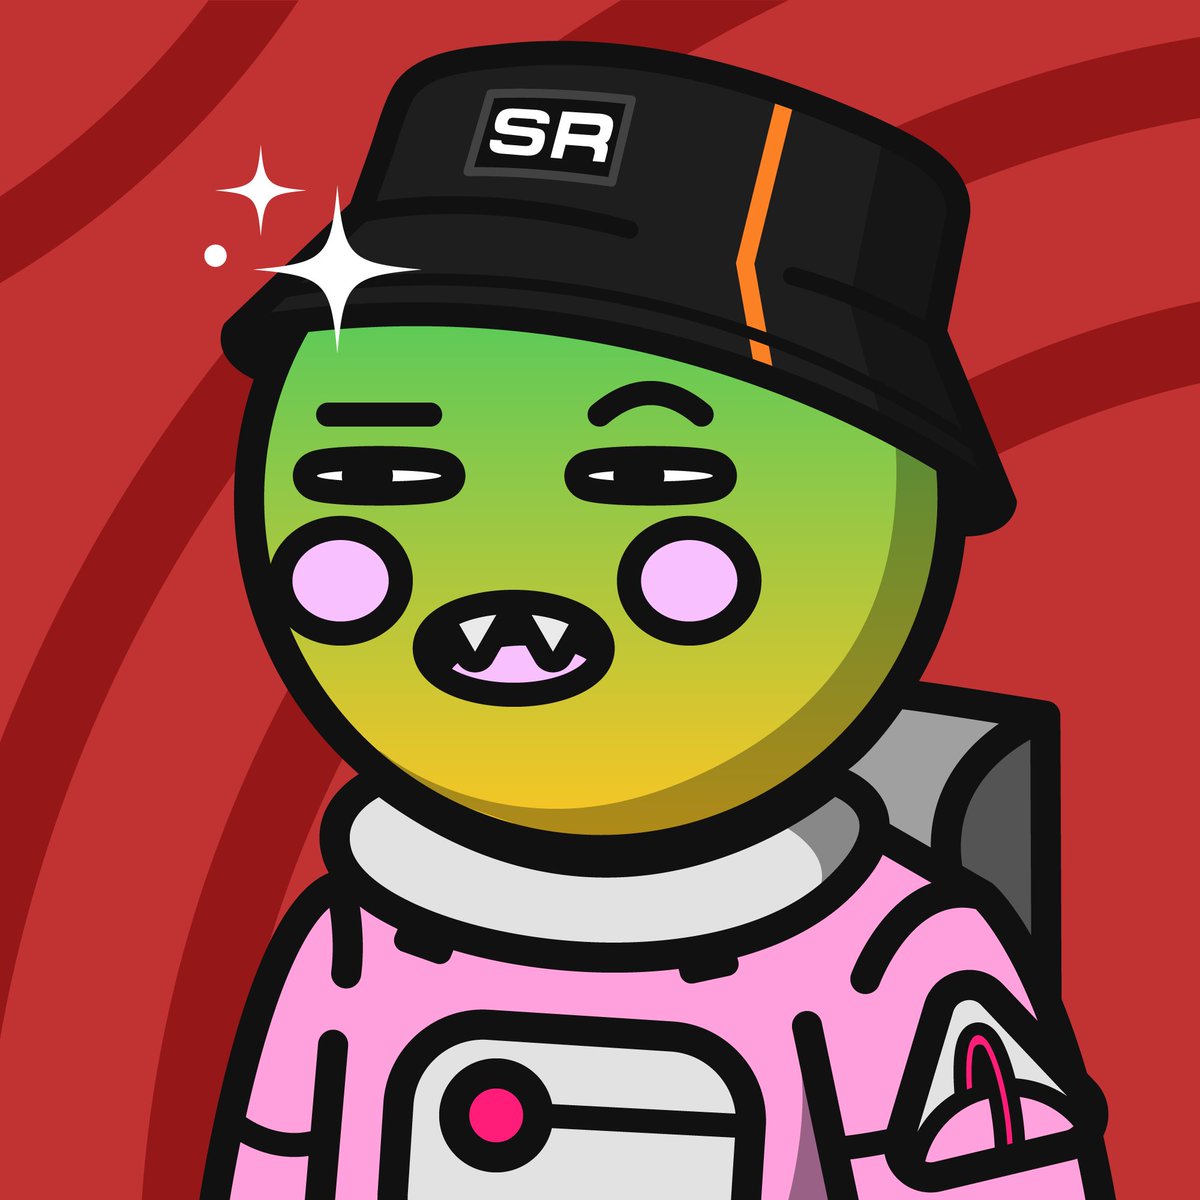 Next up in my 'BUY THE BEAR' Series is @SpaceRiders_NFT. Seen this name everywhere so snagged one and gave it a look! Things I like: -slick platform -Passive Staking -Lore/Space Log (how fun) -Tons of graphics to rep the brand -Referral Program #RideWithUs